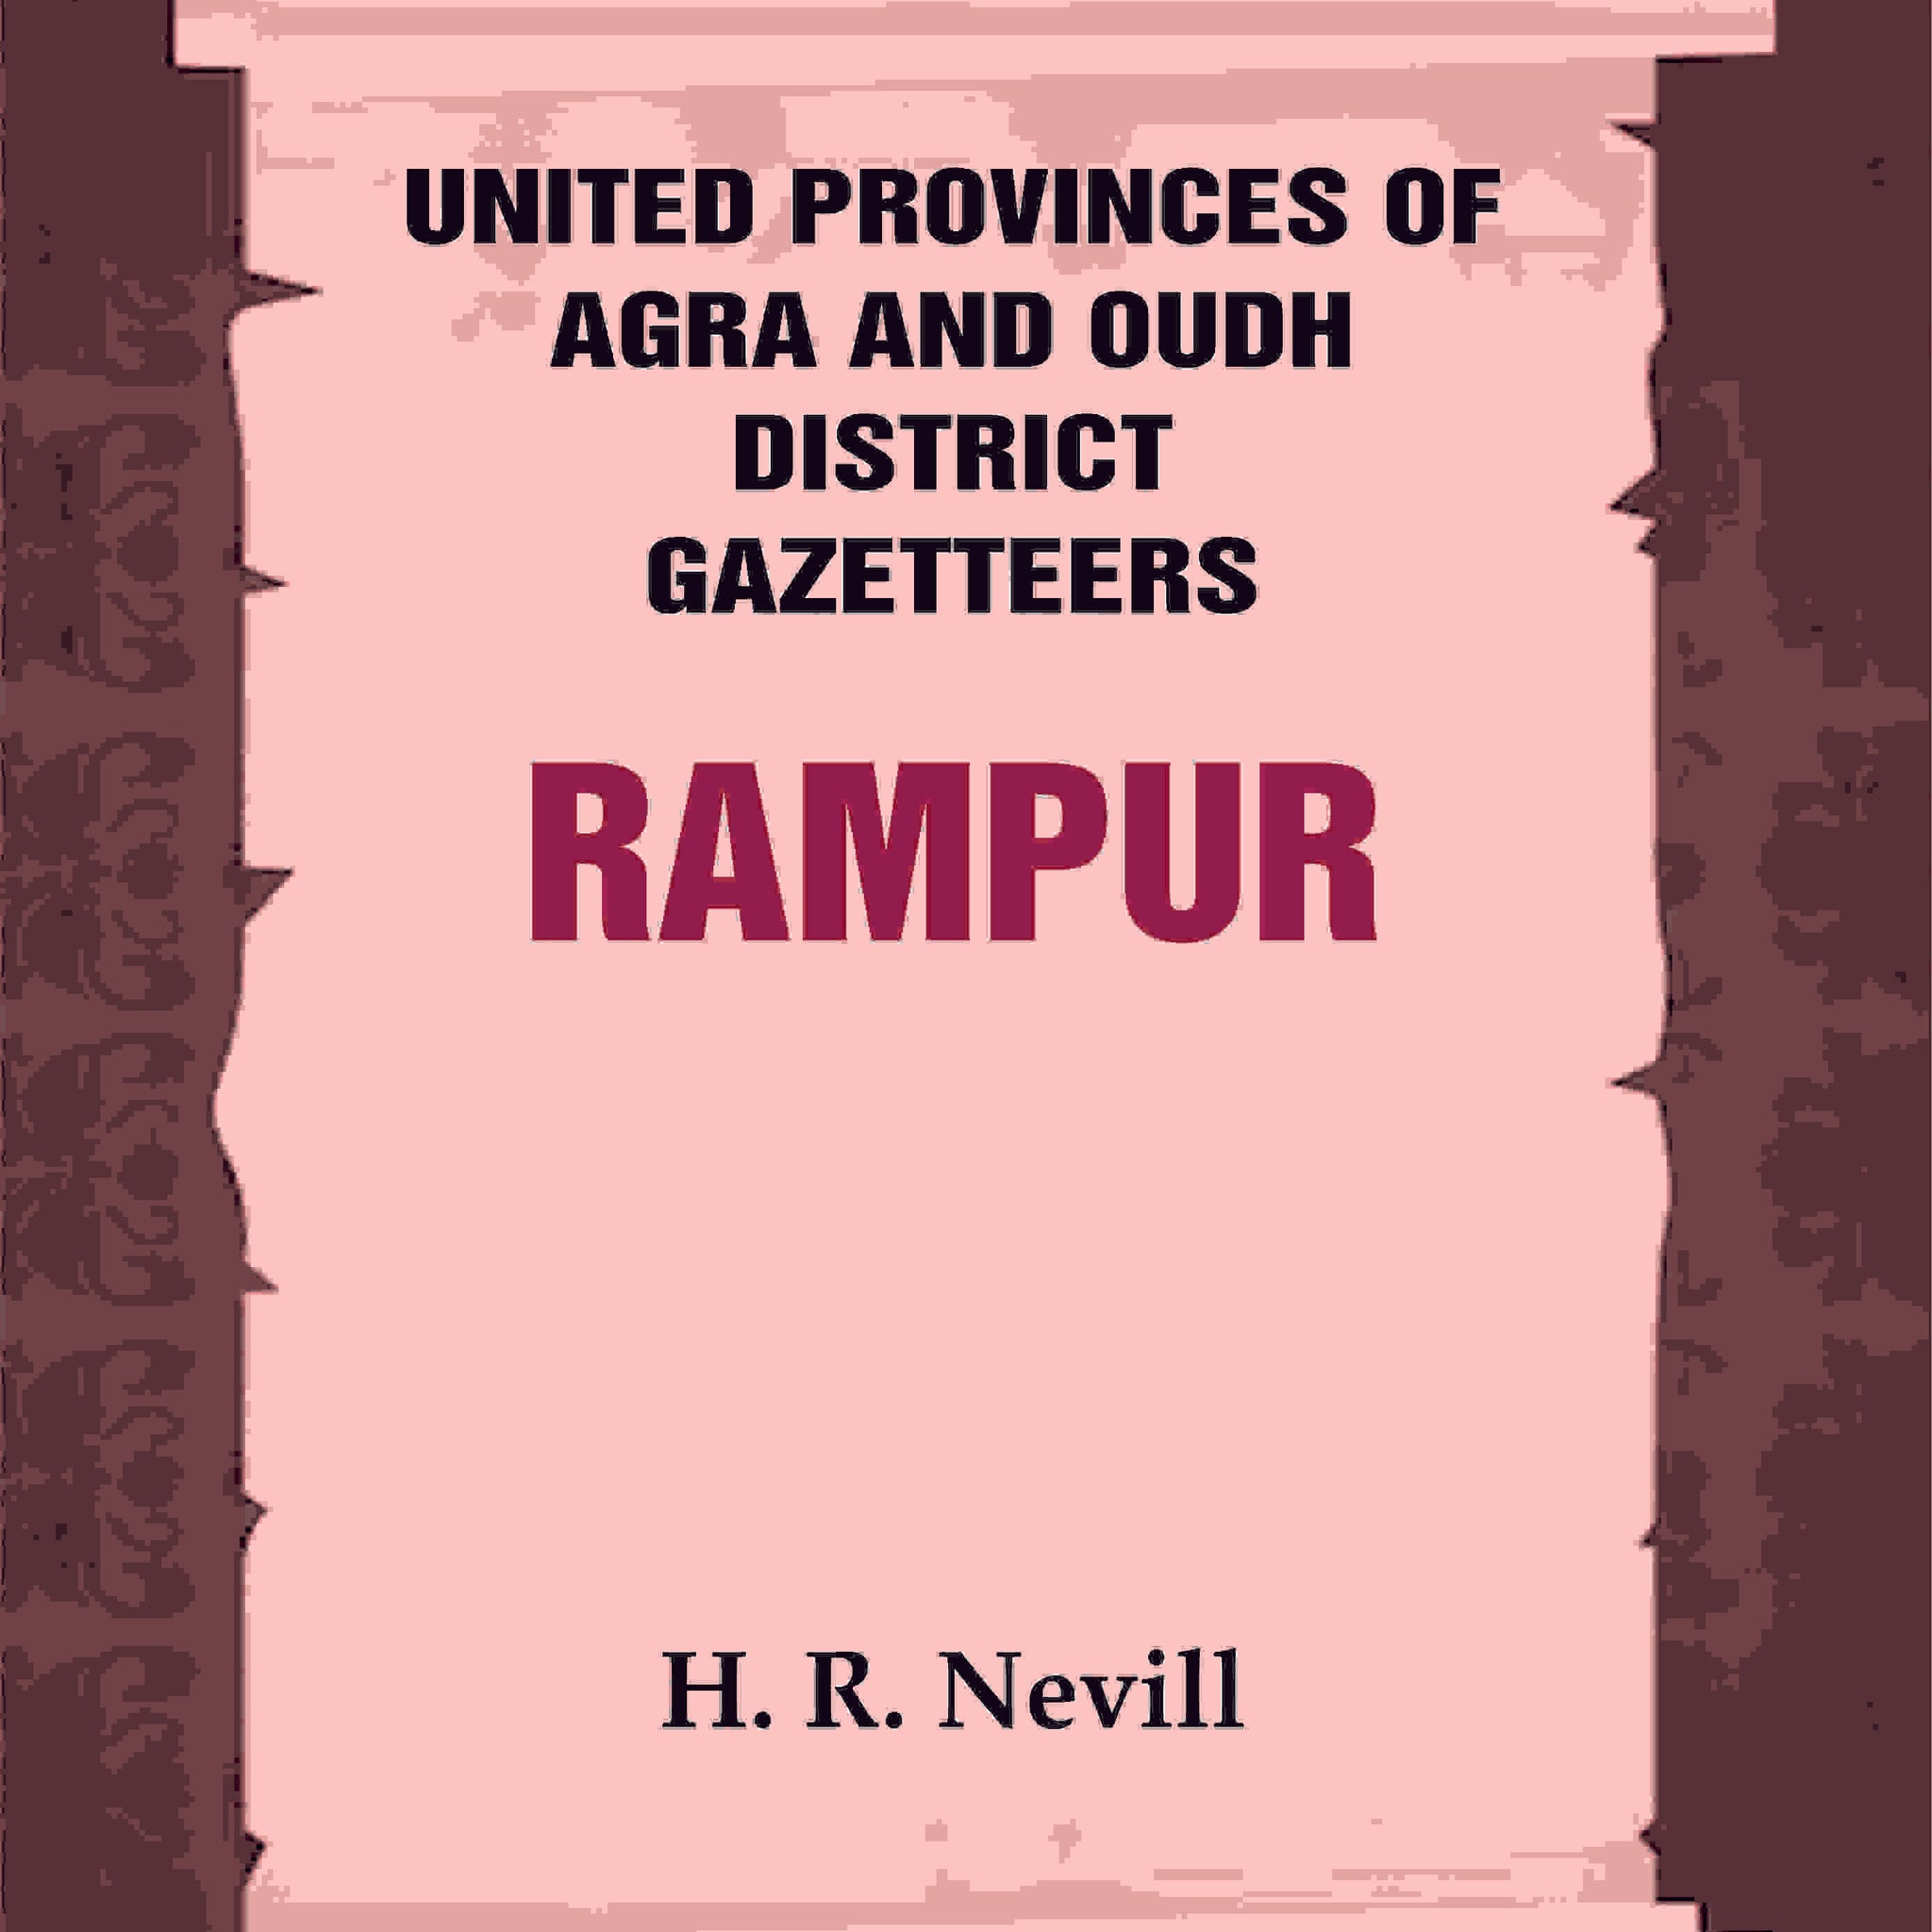 United Provinces of Agra and Oudh District Gazetteers: Rampur